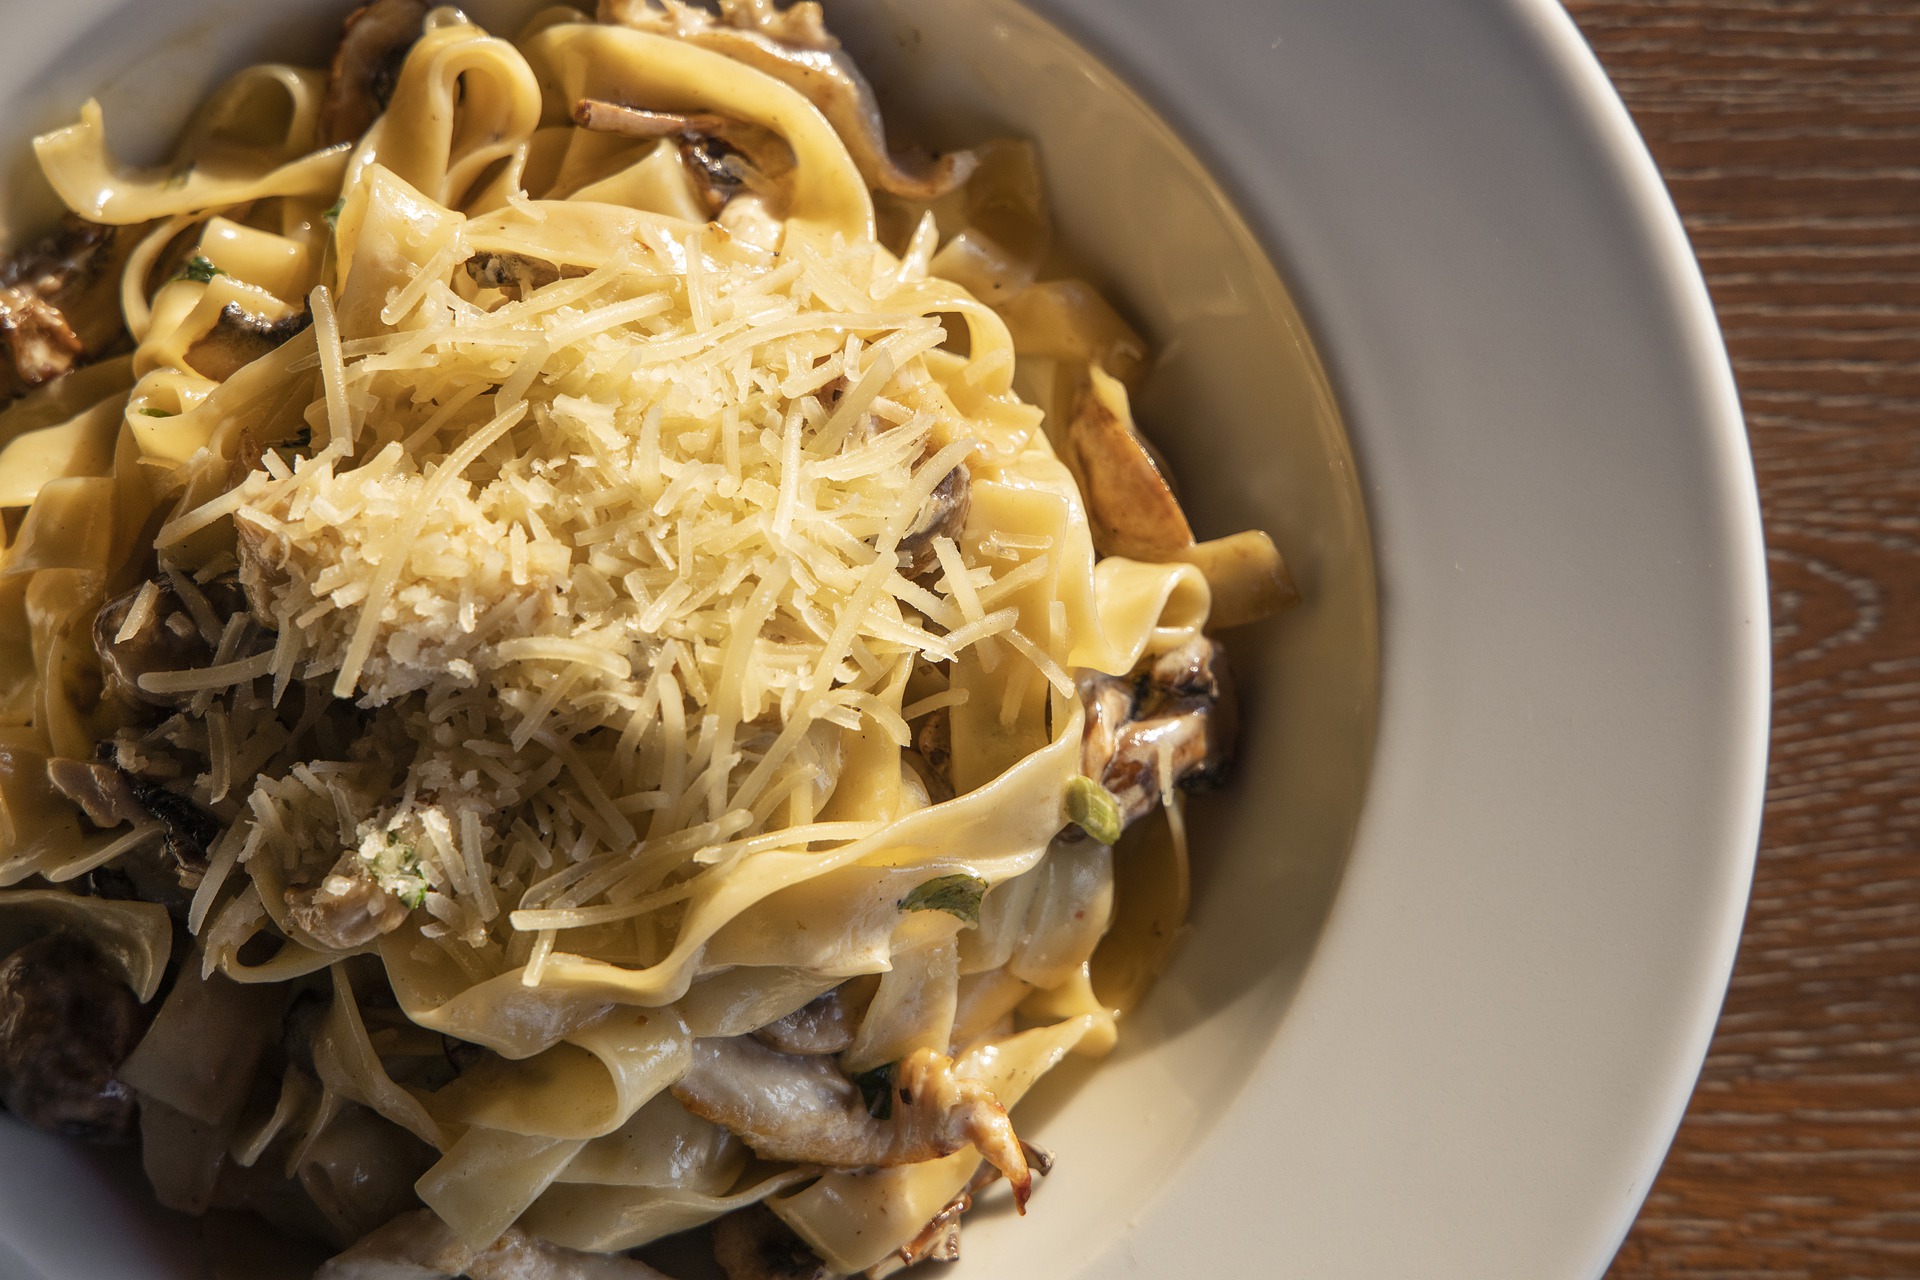 2 Recipes for Fettuccine with Creamy White Mushroom Sauce